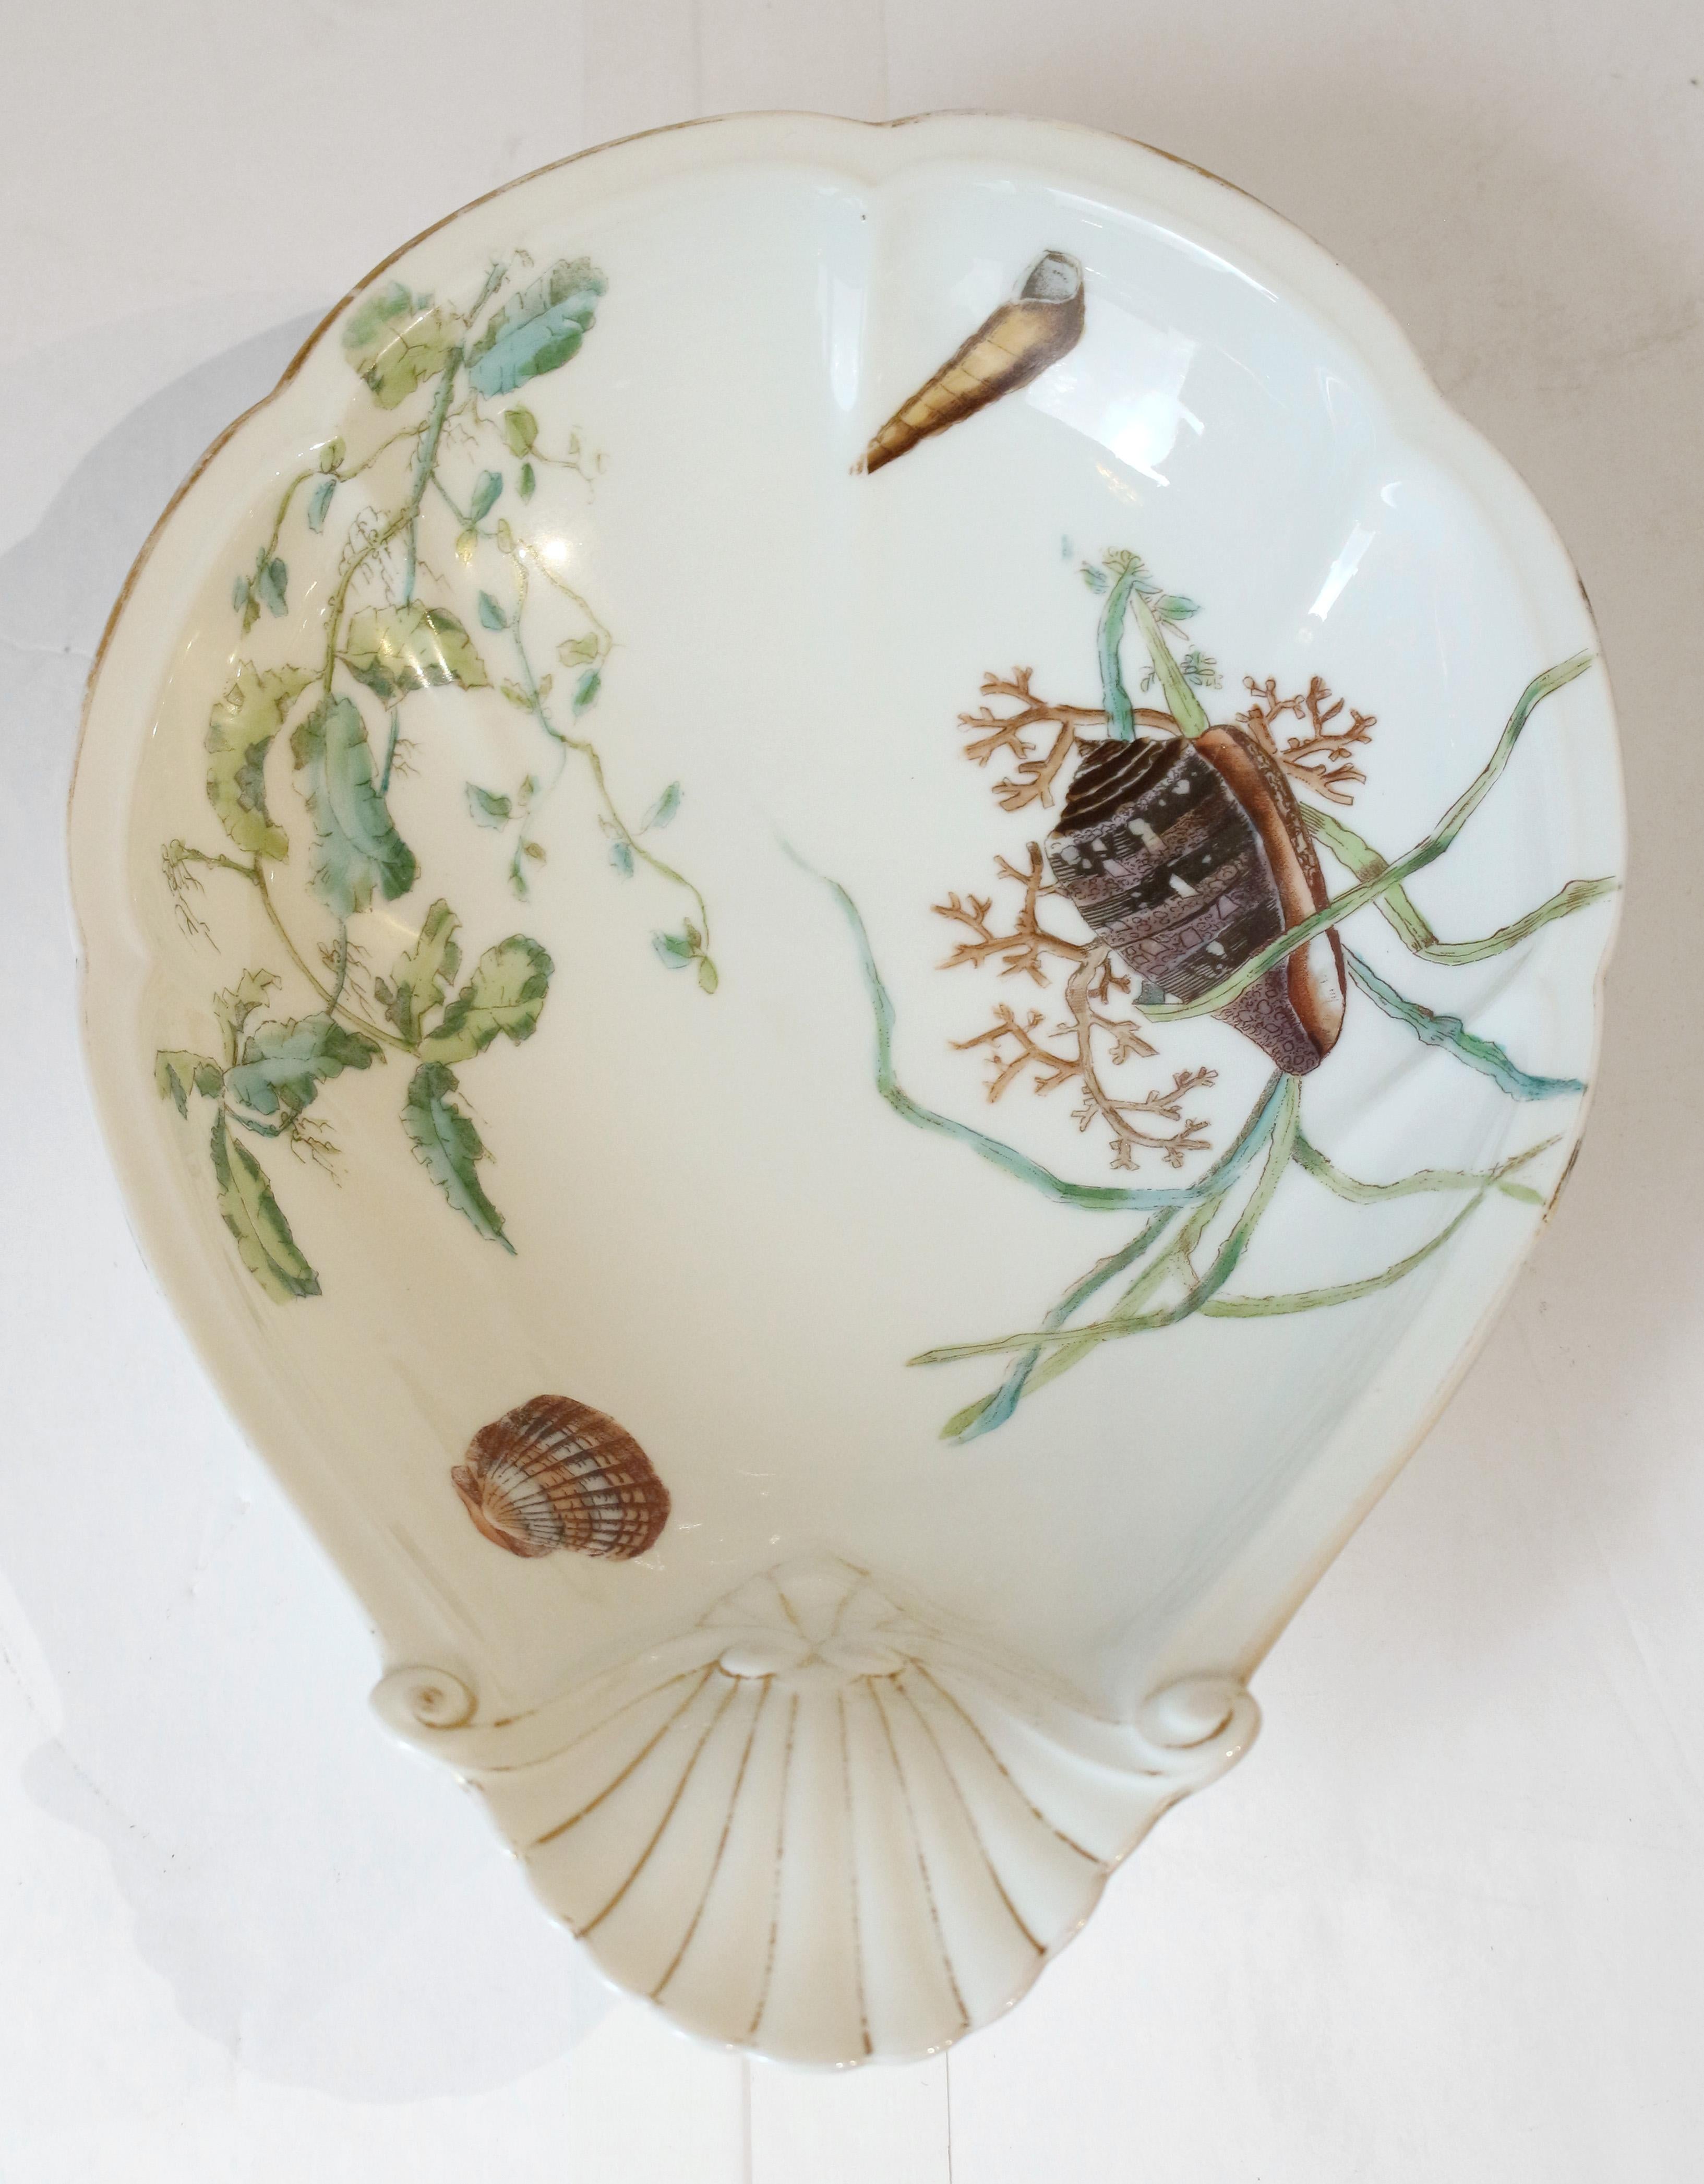 Circa 1880-1900 Seashells & Seaweed Motif Fish Service by Limoges For Sale 5